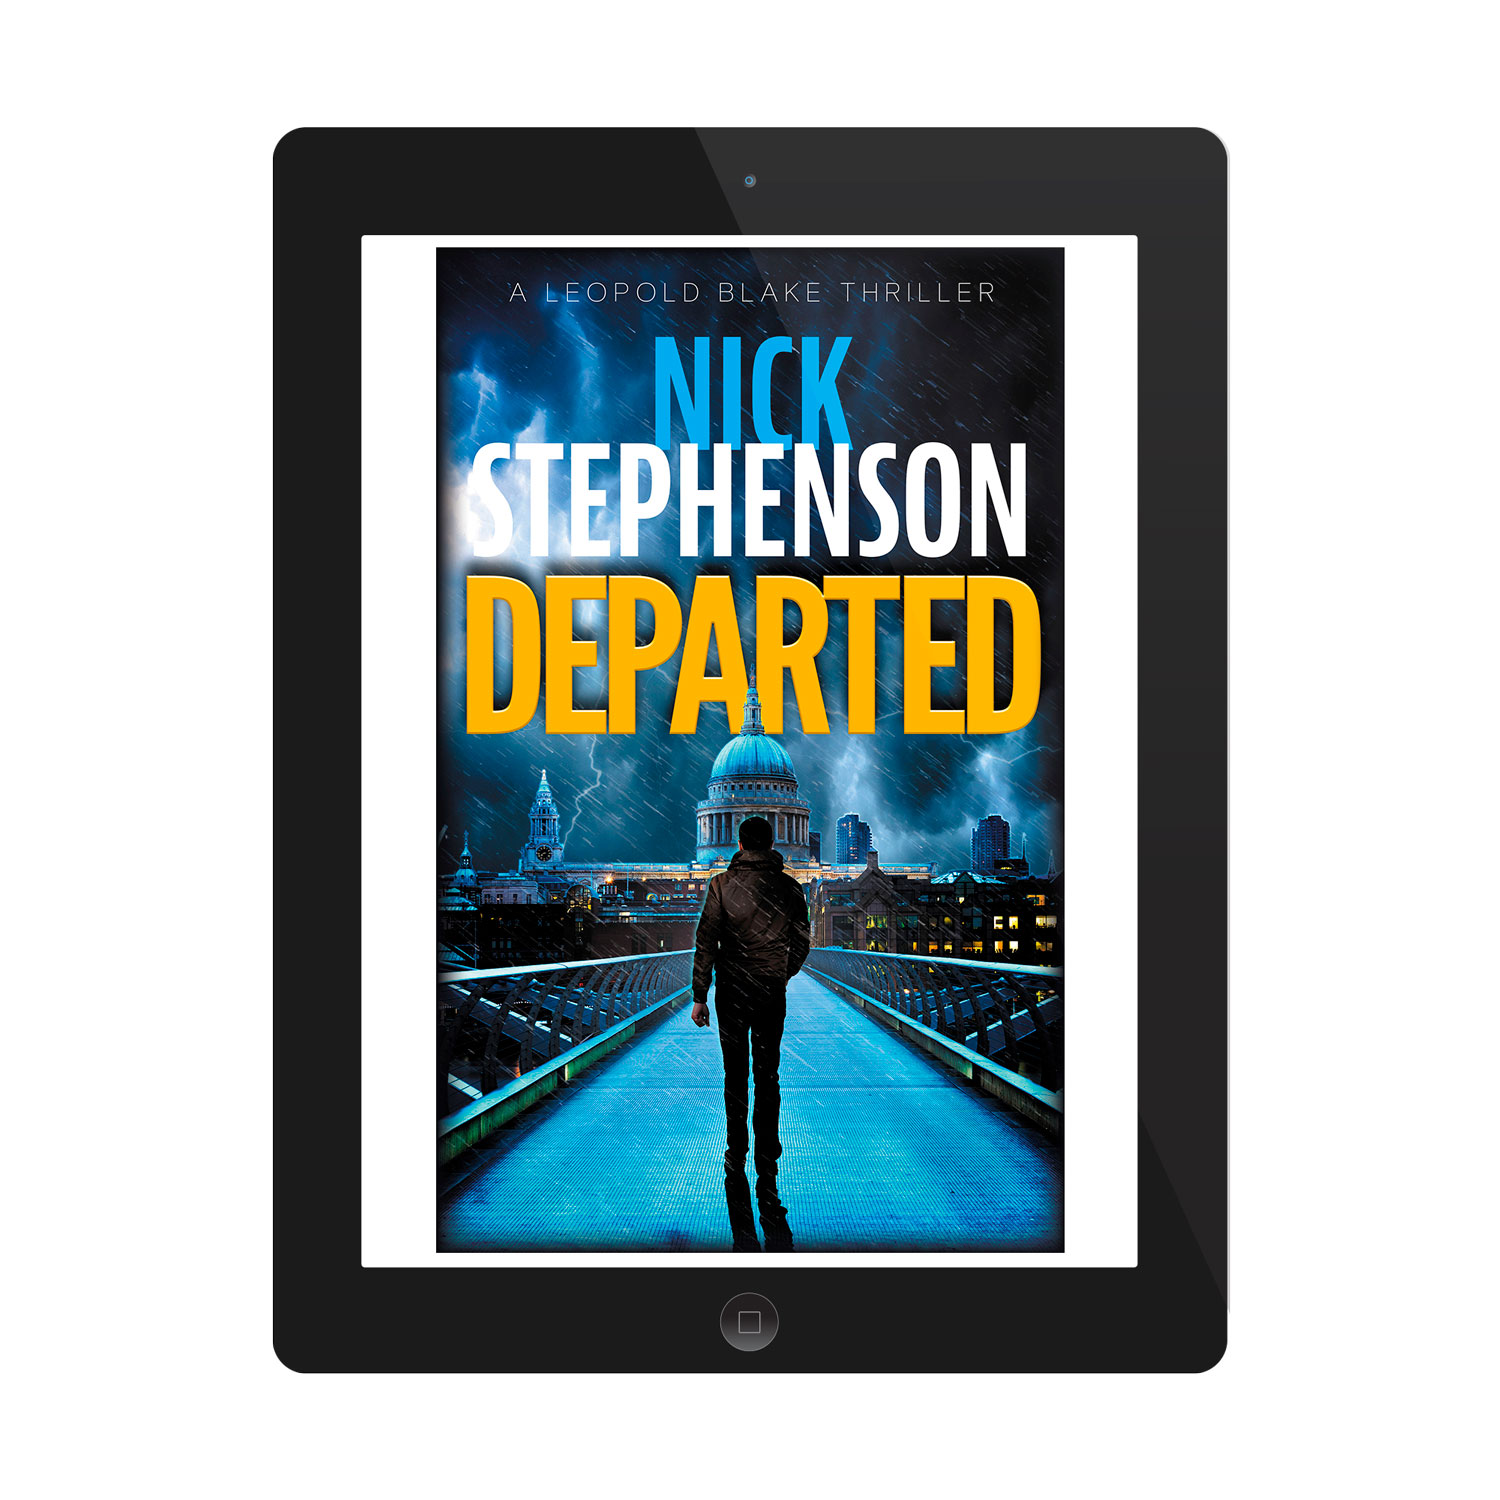 'Leopold Blake' is a terrific thriller series. The author is Nick Stephenson. The book cover designs are by Mark Thomas. To learn more about what Mark could do for your book, please visit coverness.com.